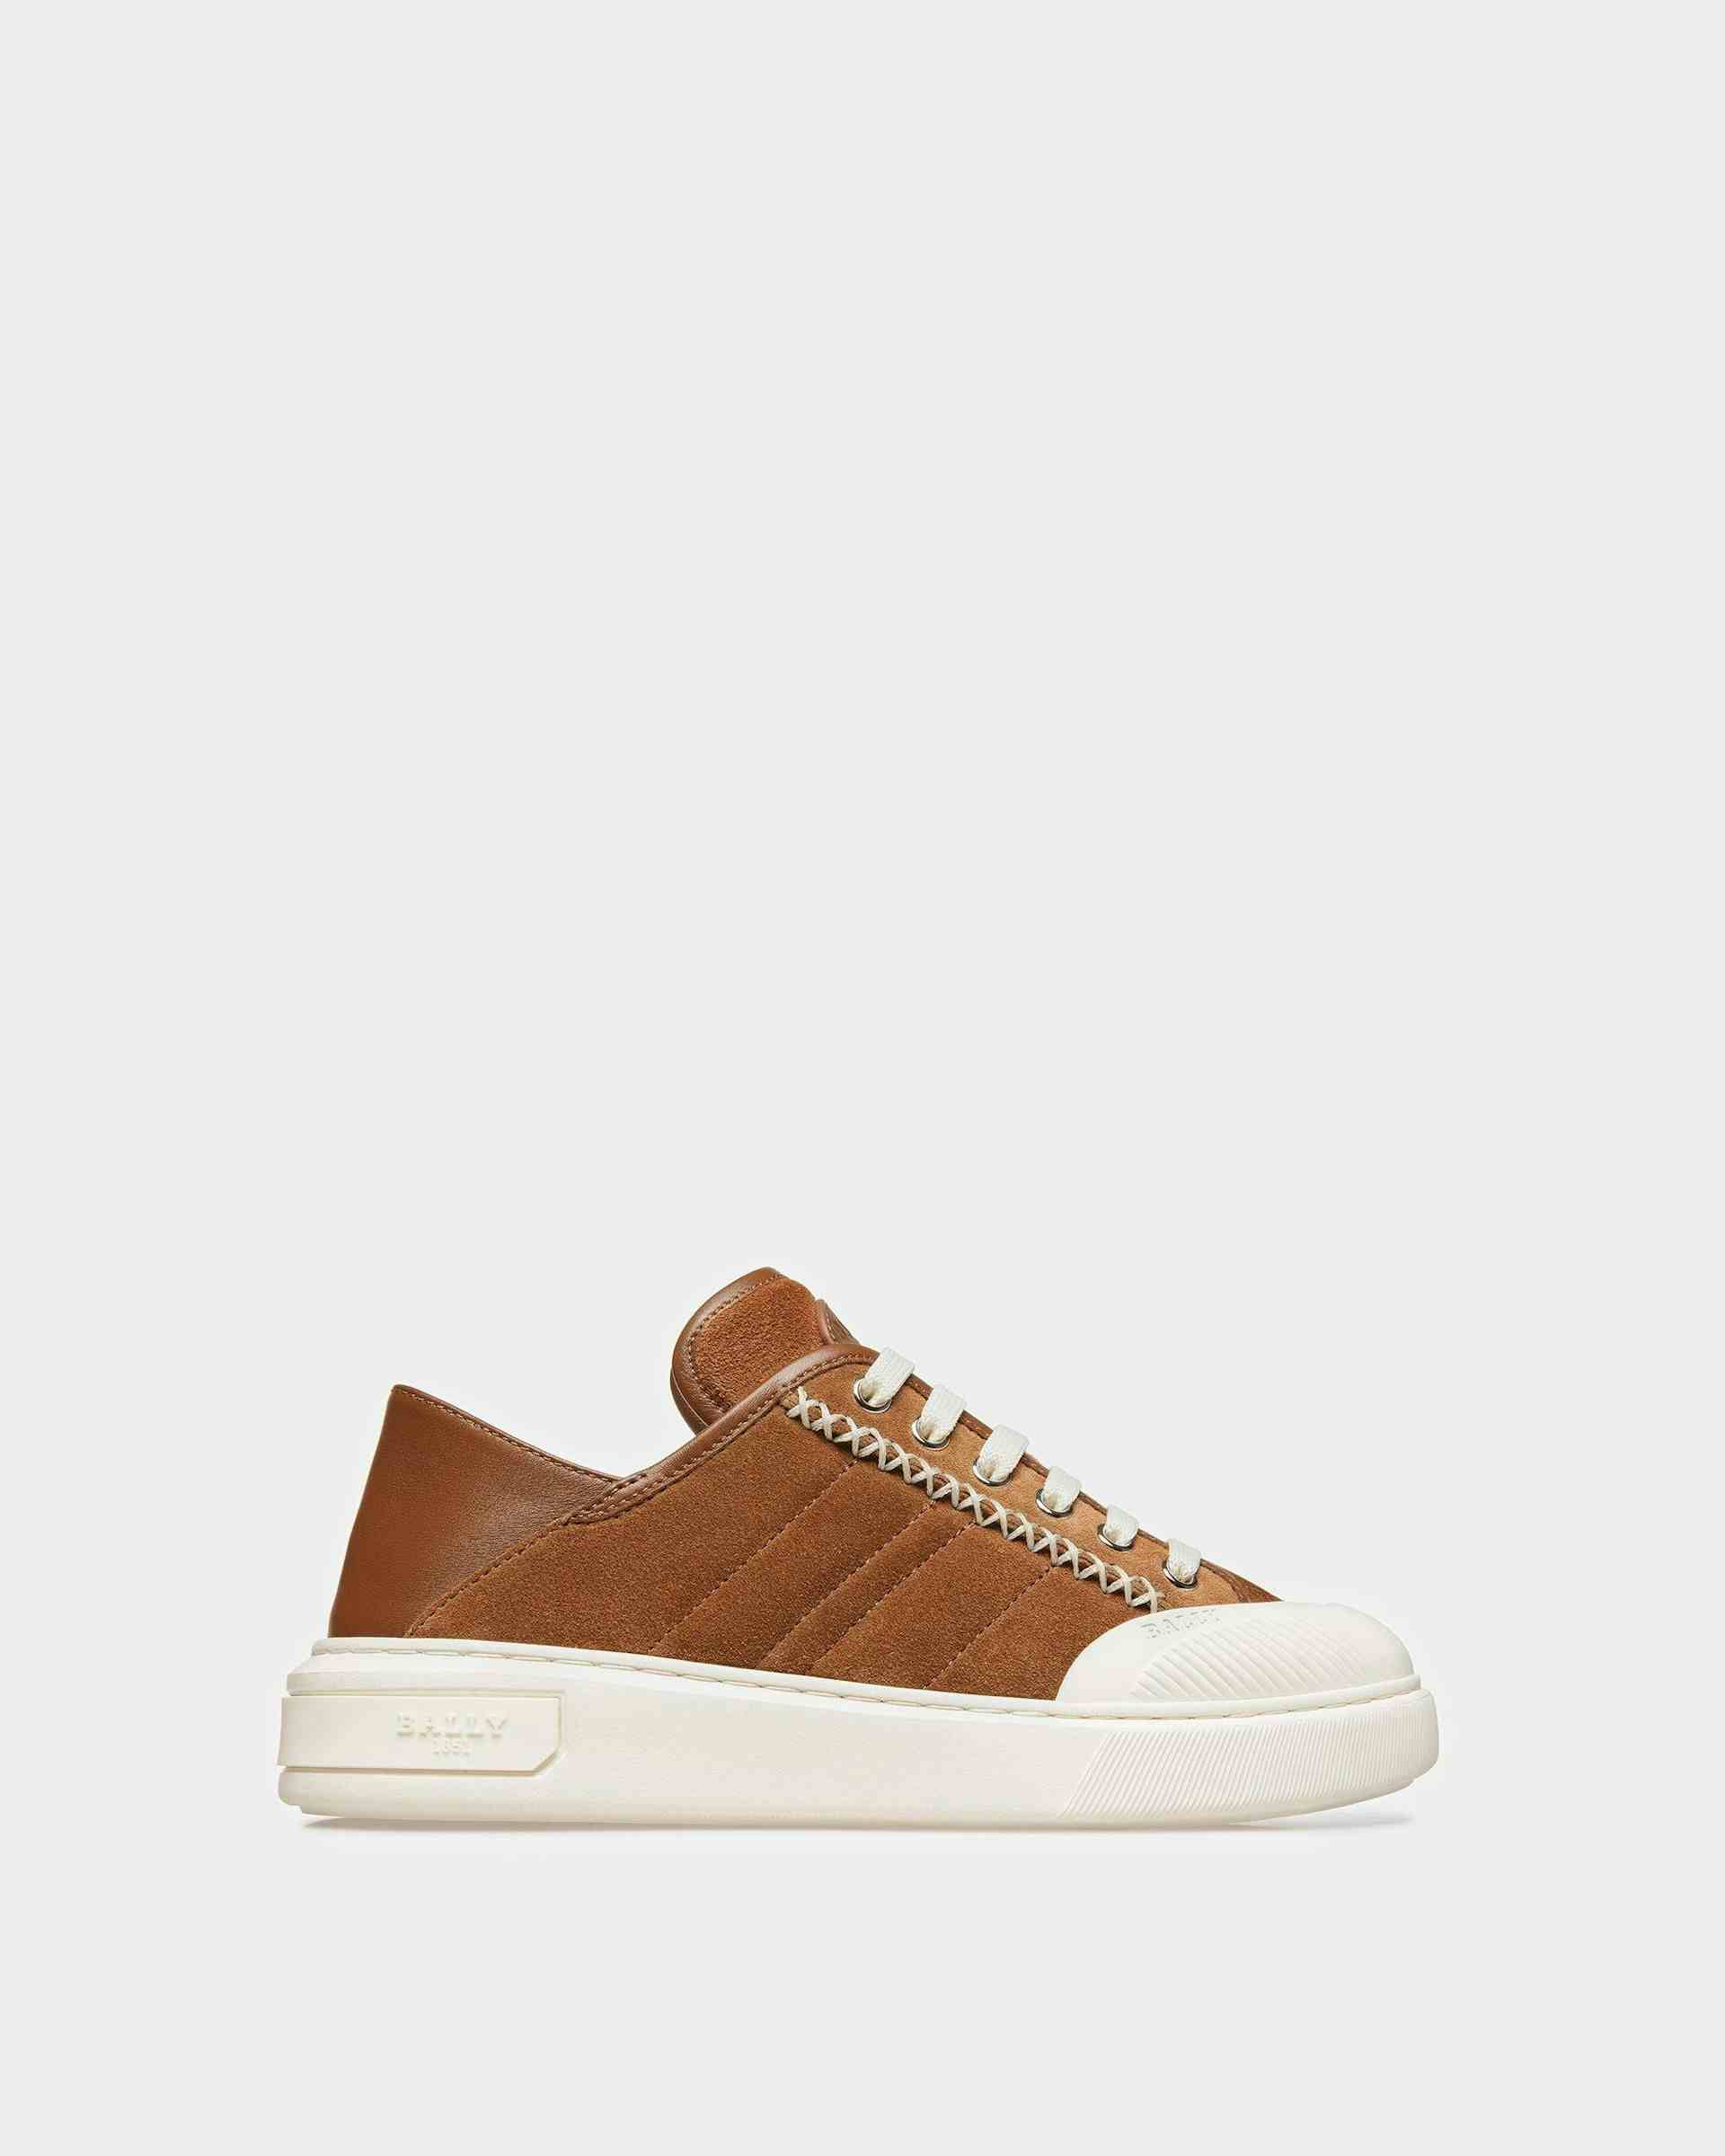 Marily Suede Sneakers In Brown - Women's - Bally